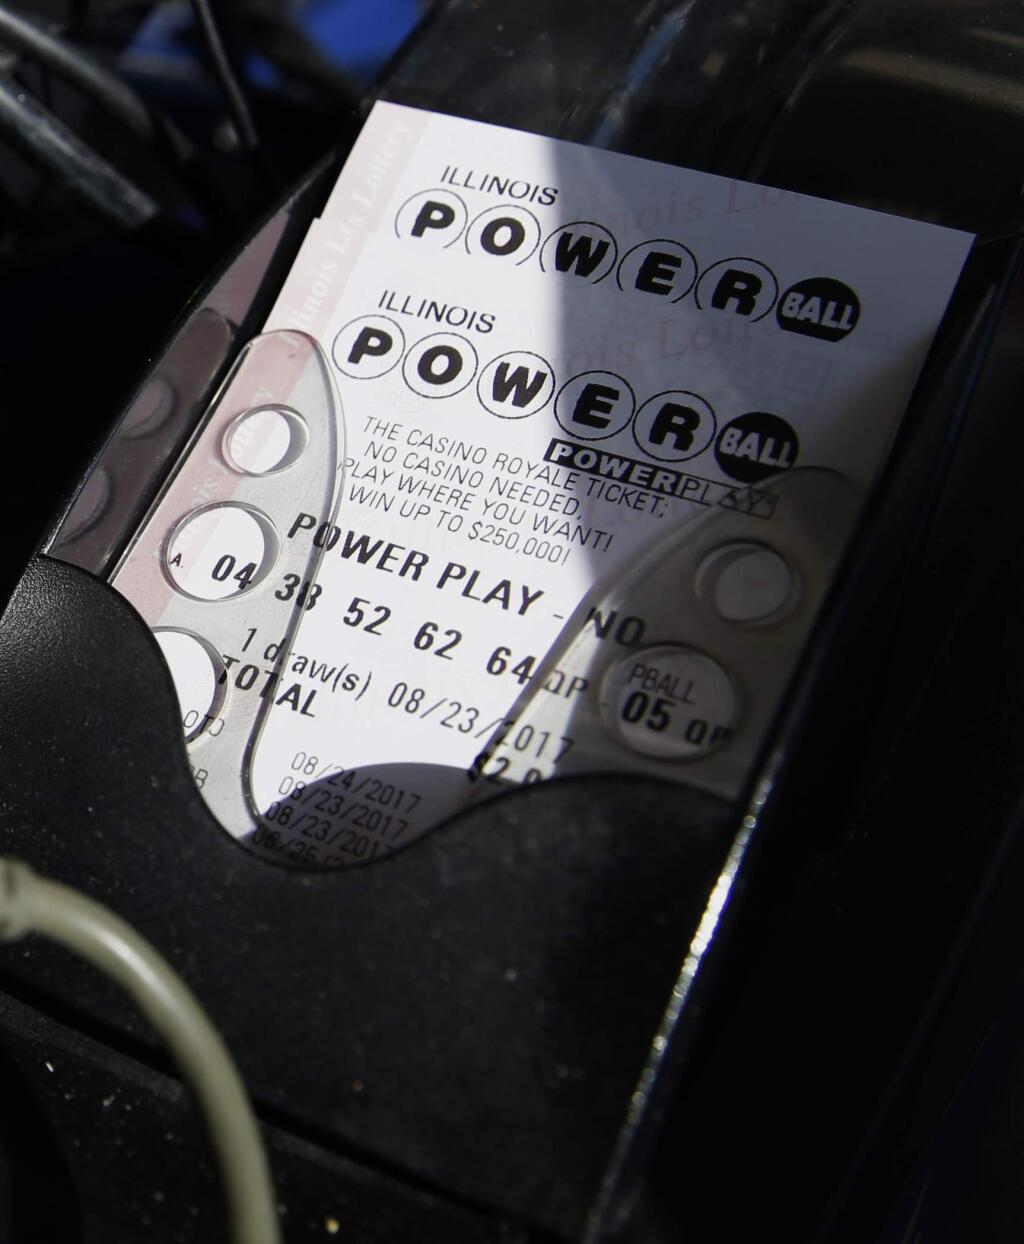 A Powerball lottery ticket is printed out of a lottery machine at a convenience store Wednesday, Aug. 23, 2017, in Northbrook, Ill. Lottery officials said the grand prize for Wednesday night's drawing has reached $700 million. The second -largest on record for any U.S. lottery game. (AP Photo/Nam Y. Huh)